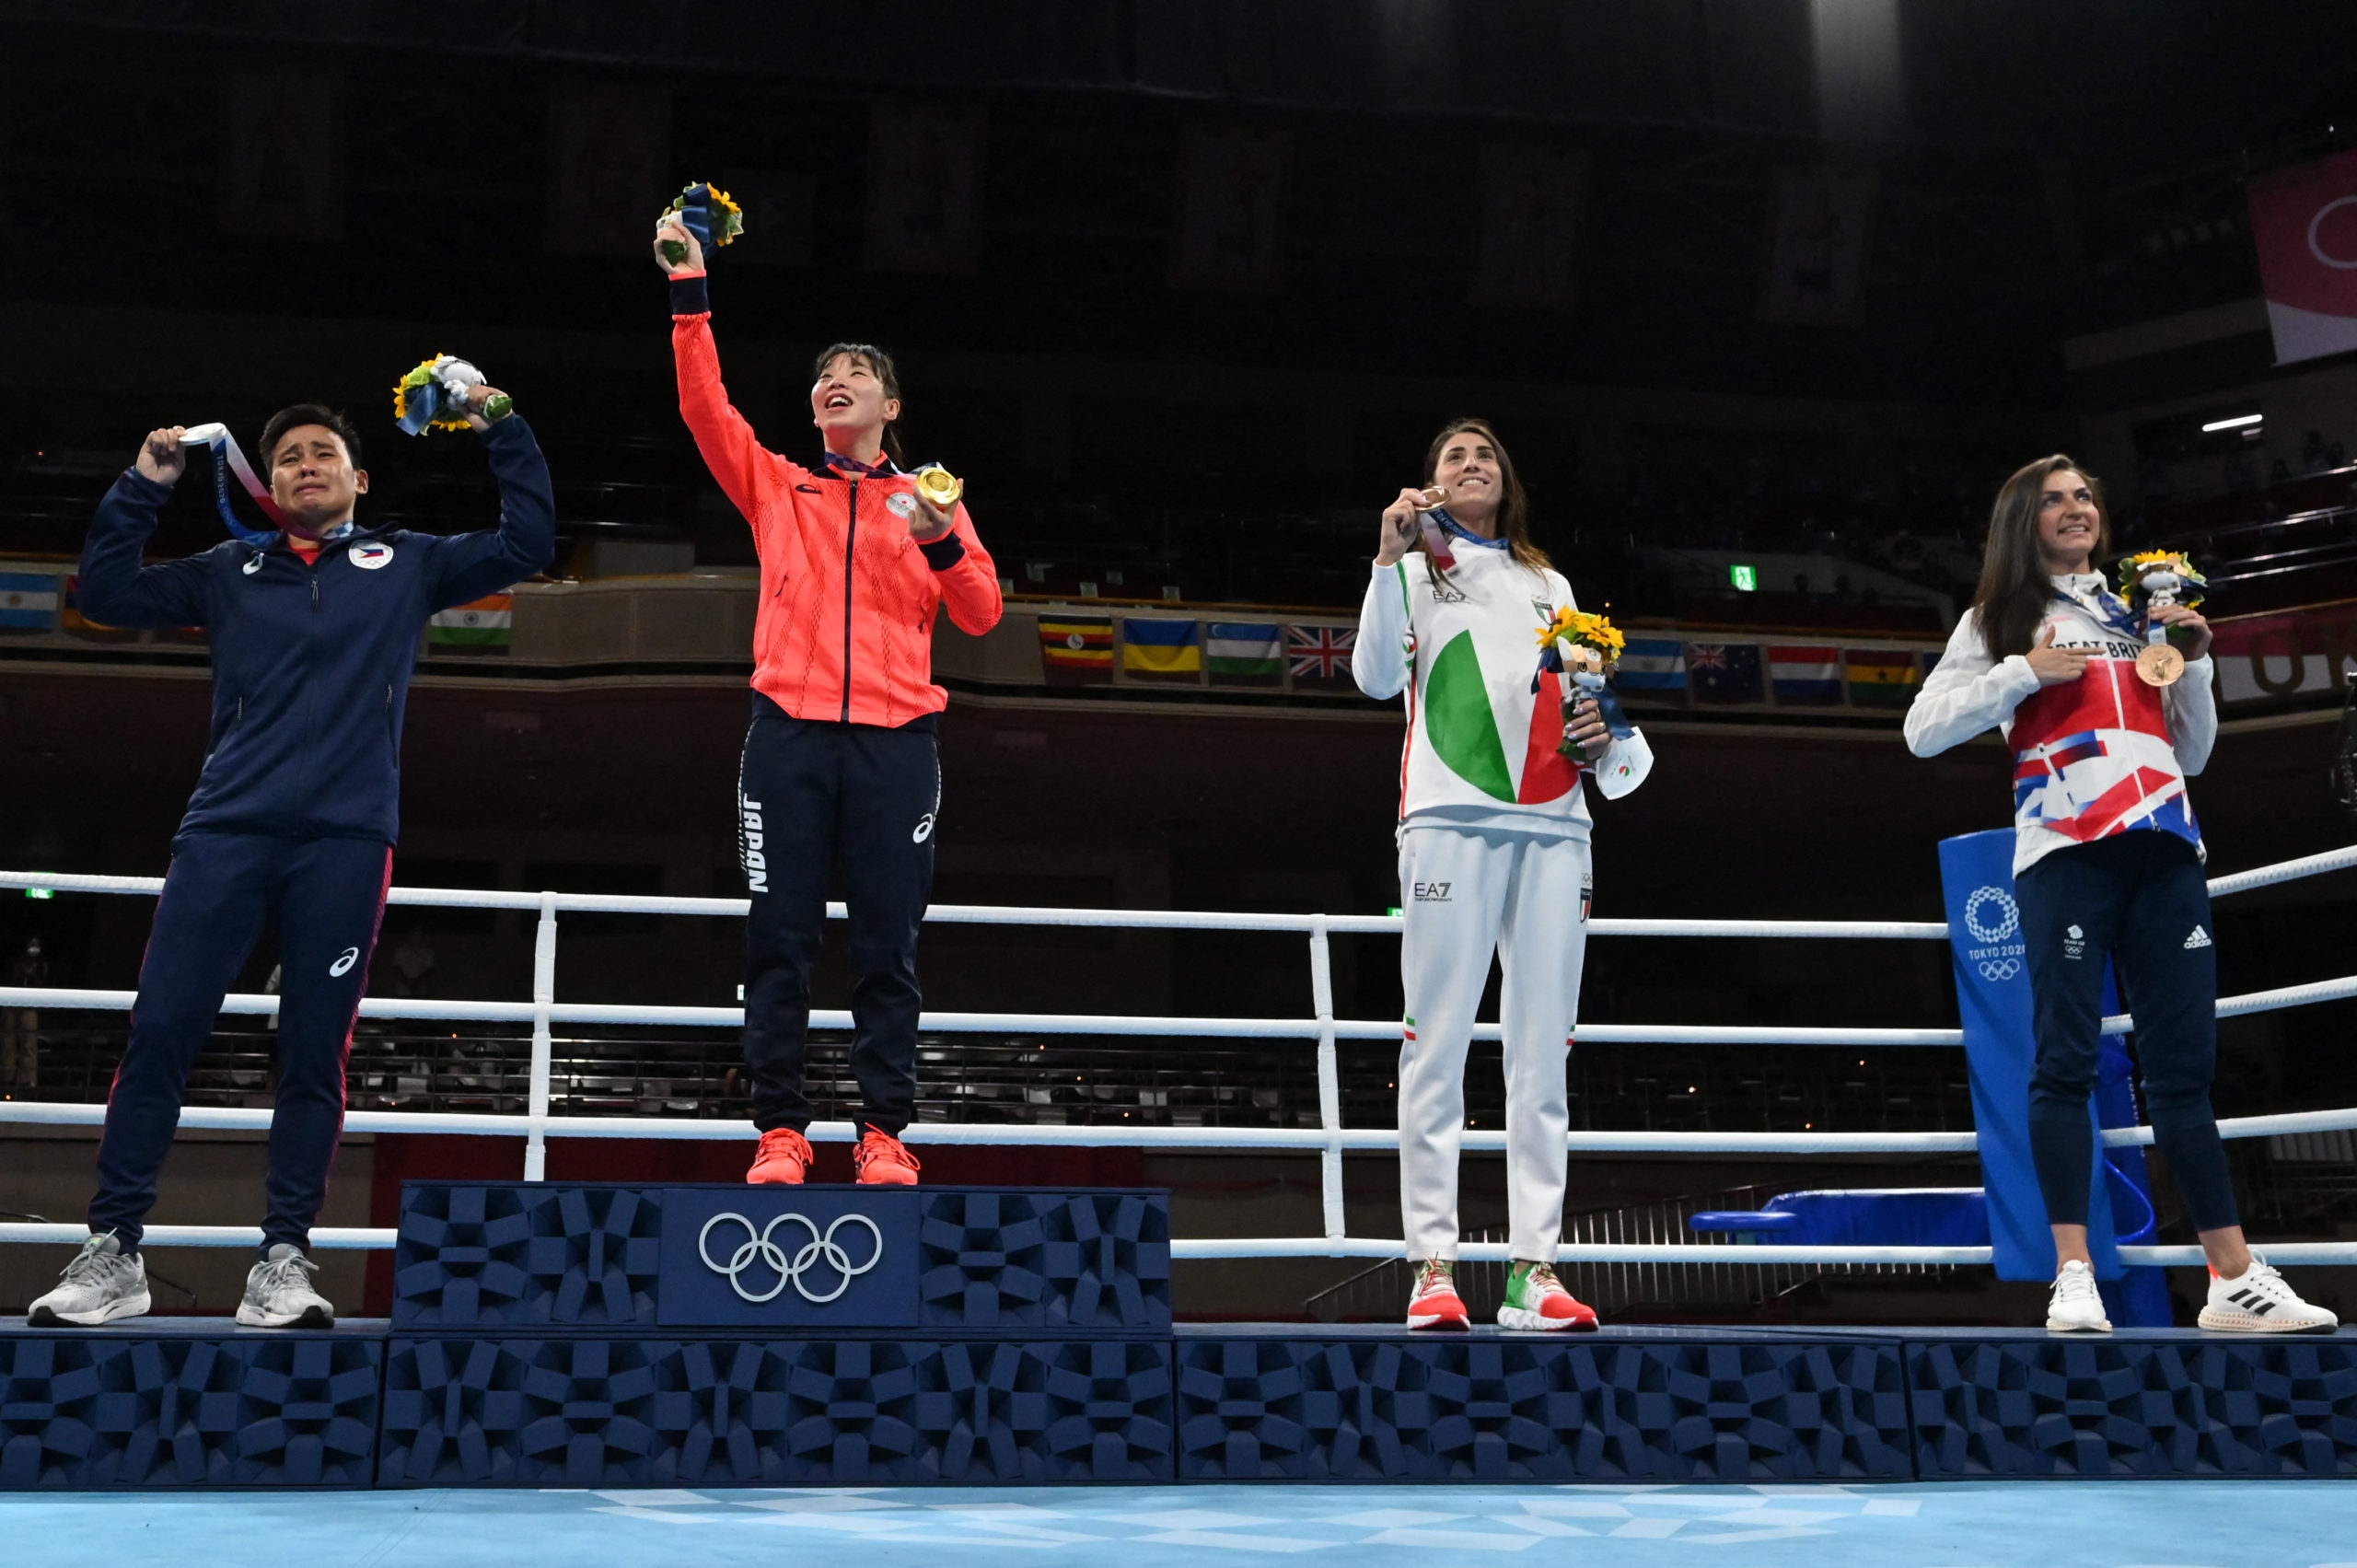 medallist Philippines' Nesthy Petecio, gold medallist Japan's Sena Irie, bronze medallists Italy's Irma Testa and Britain's Karriss Artingstall, pose on the podium after the women's feather (54-57kg) boxing final bout during the Tokyo 2020 Olympic Games at the Kokugikan Arena in Tokyo on August 3, 2021.